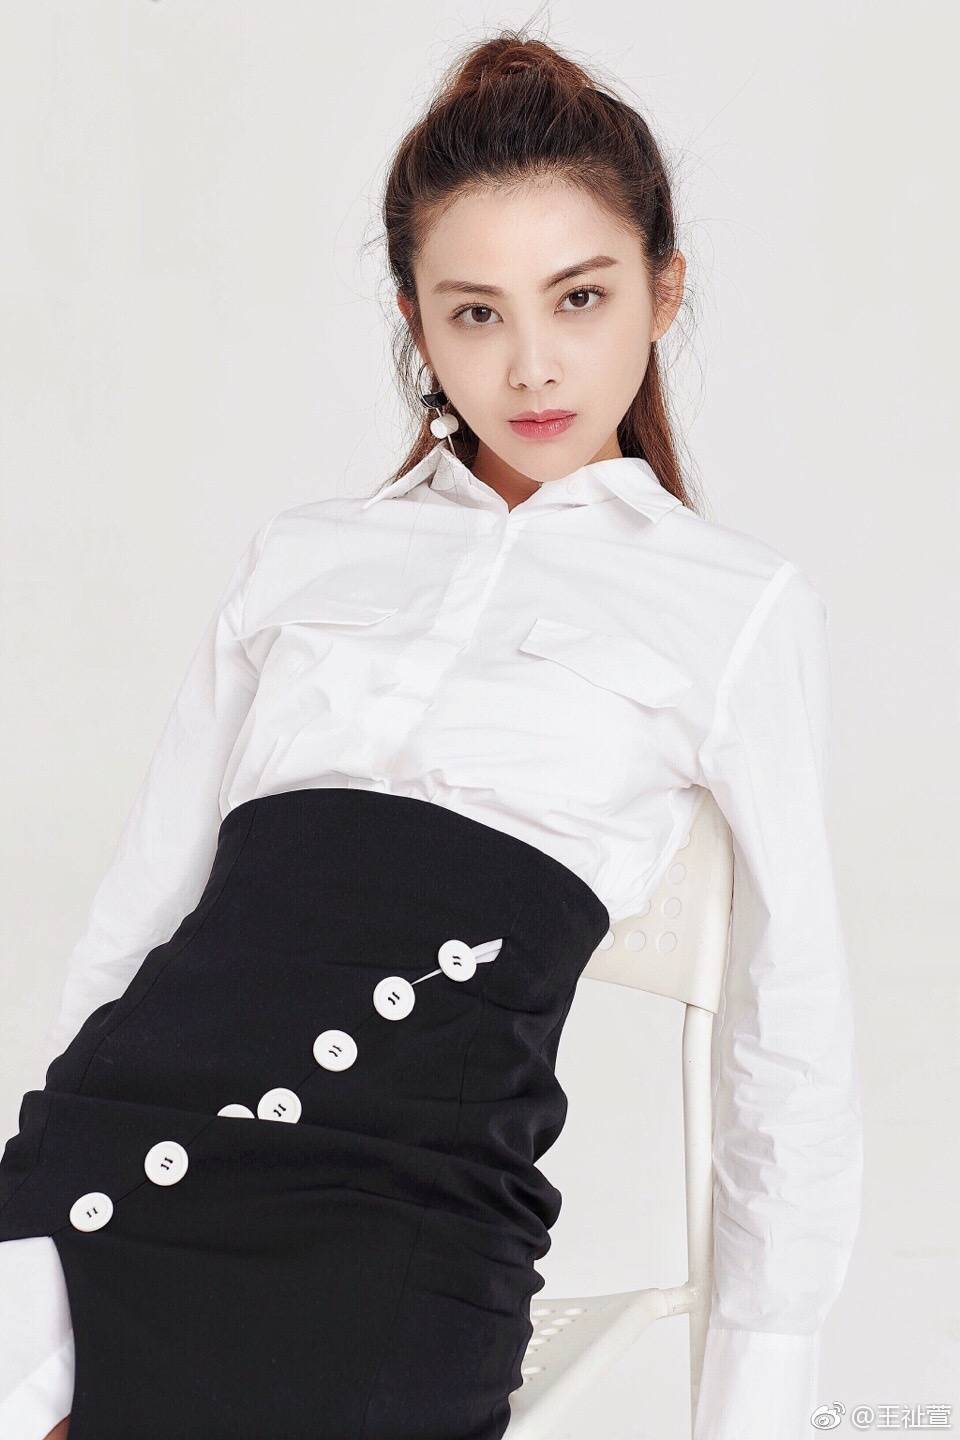 Zhixuan Wang Sexy and Hottest Photos , Latest Pics